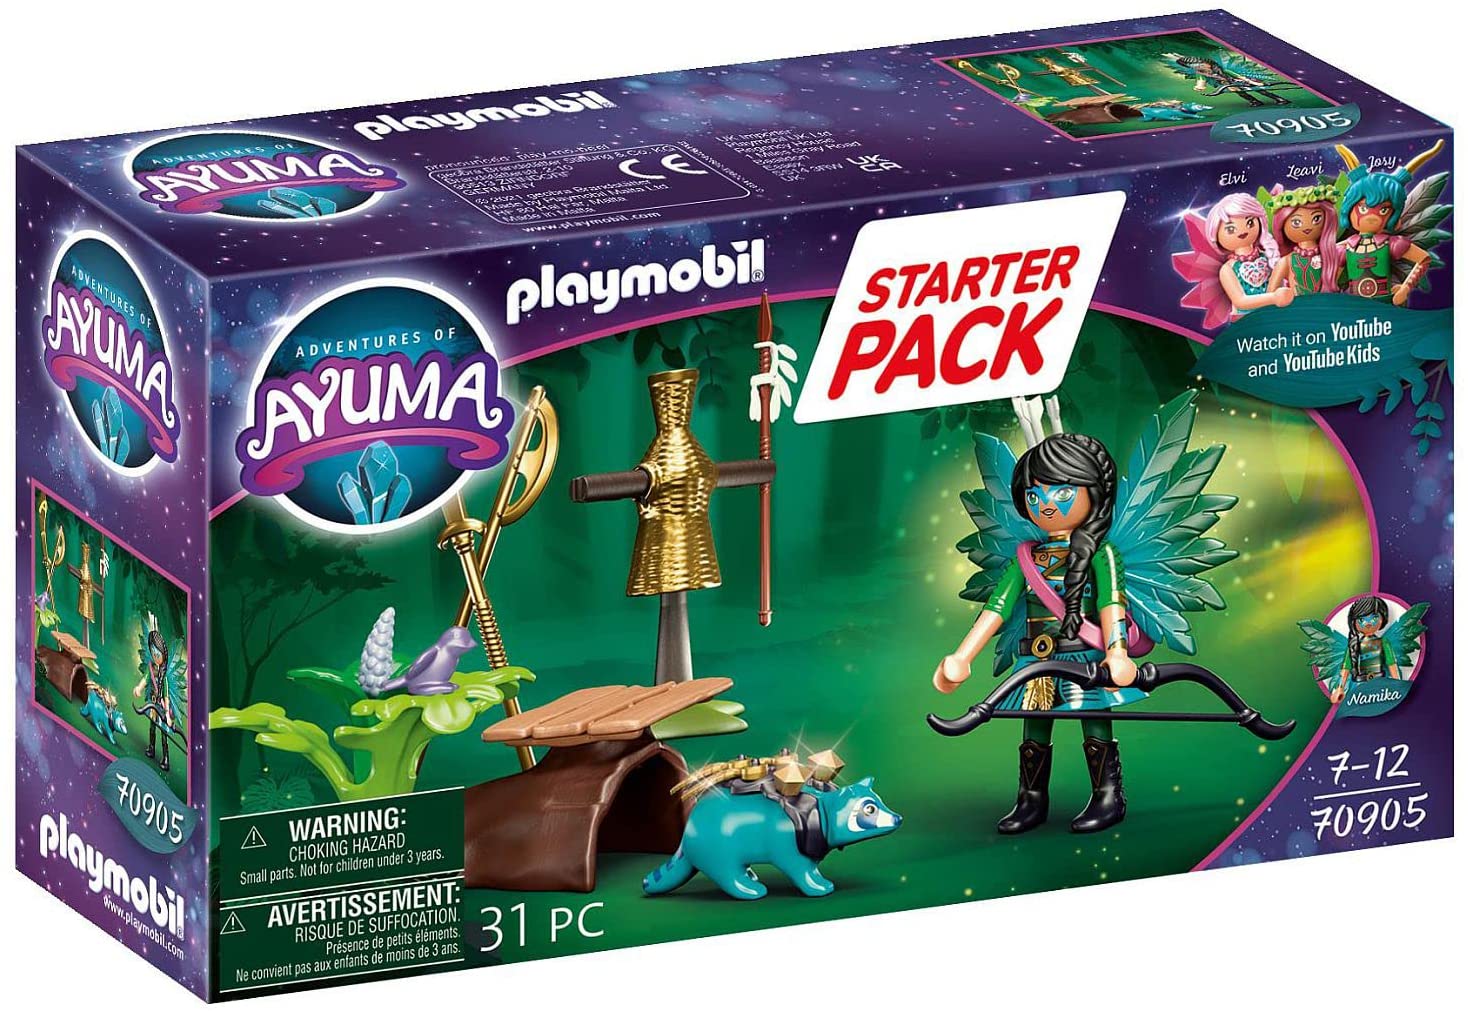 PLAYMOBIL Adventures of Ayuma 70905 Starter Pack Knight Fairy with Raccoon, Toy for Children from 7 Years